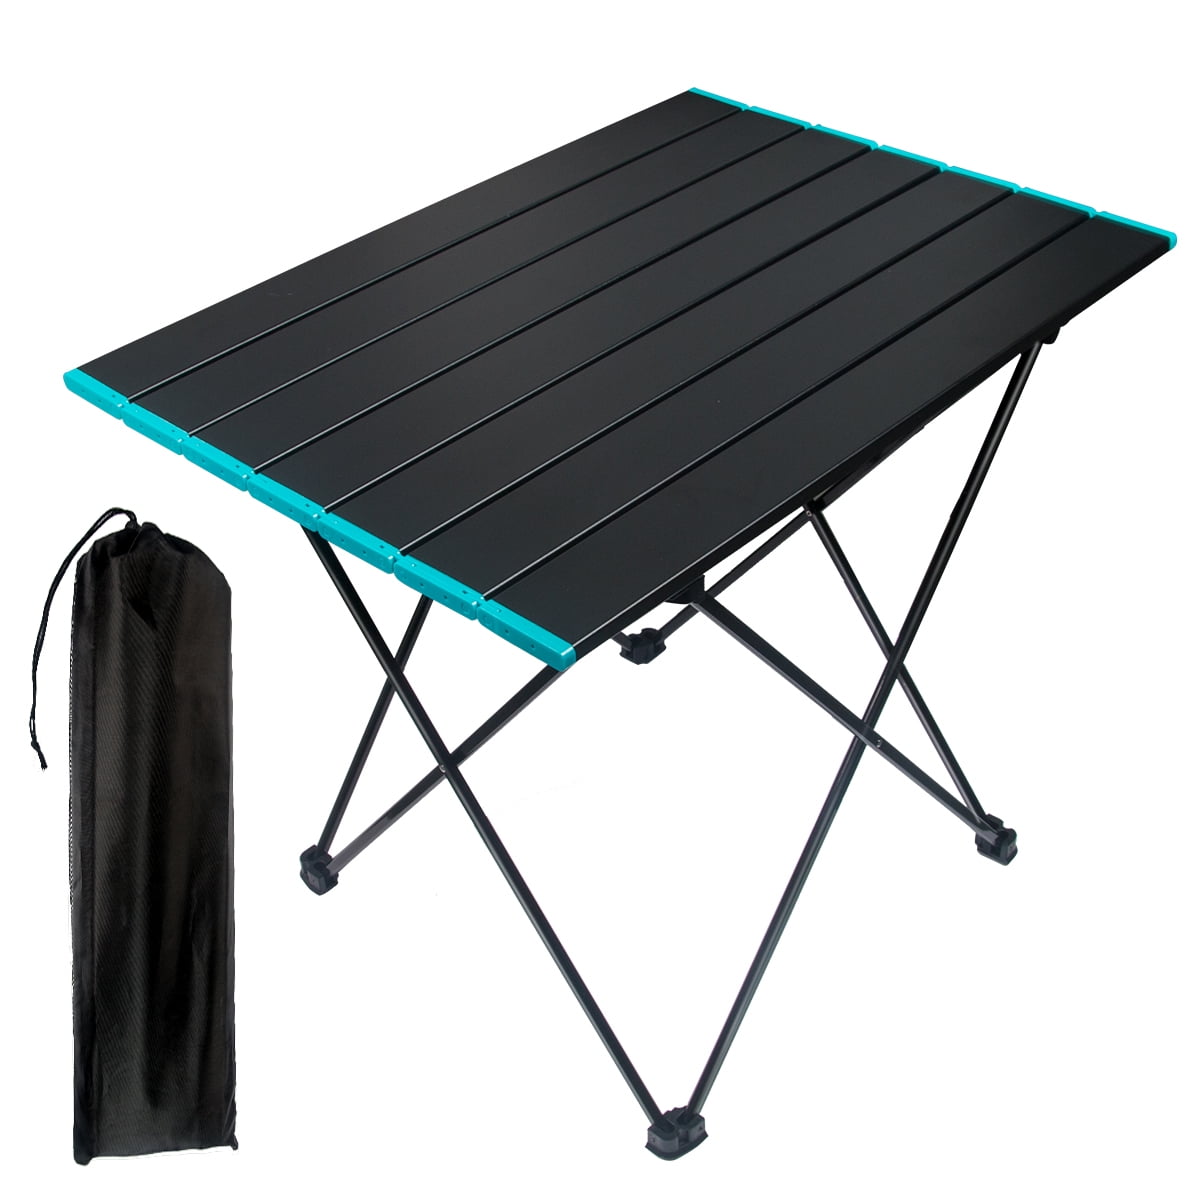 Outdoor Portable Folding Aluminum Table Lightweight Camping Picnic with Bag 